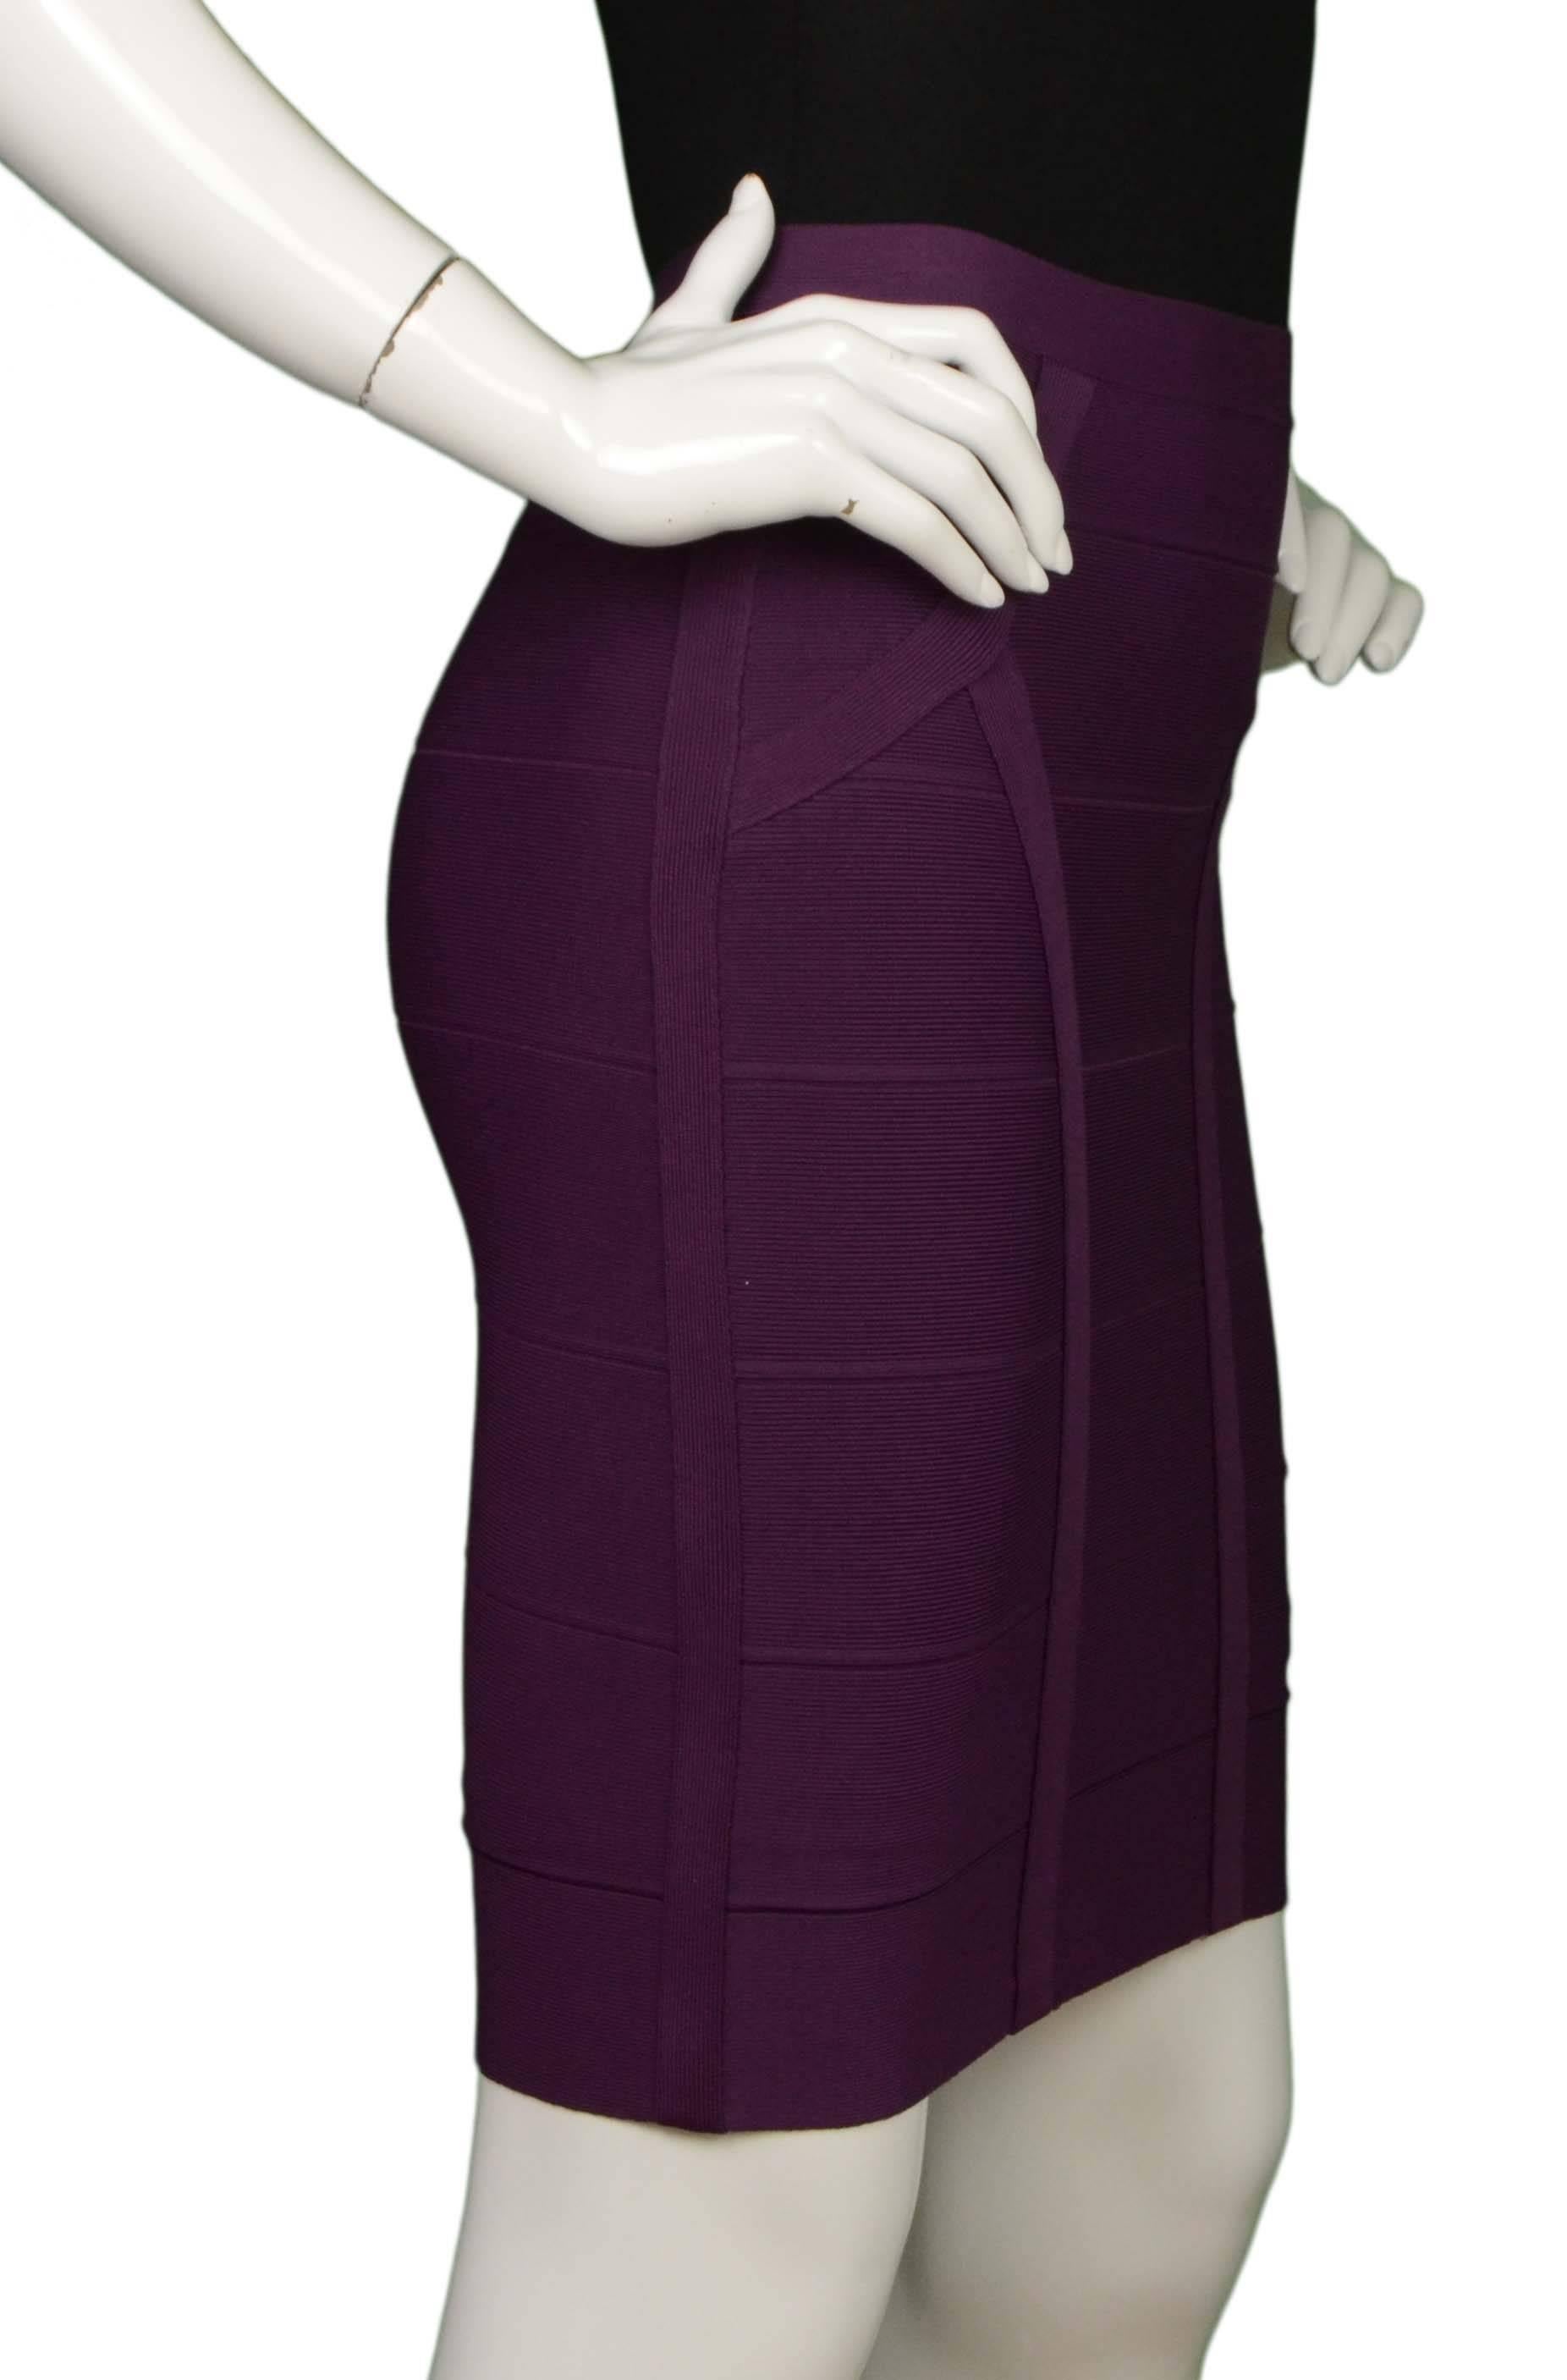 Herve Leger Purple Bandage Skirt 
Made In: China
Color: Purple
Composition: 90% rayon, 9% nylon, 1% spandex
Lining: None
Closure/Opening: Back center zipper and hook and eye closure
Exterior Pockets: None
Interior Pockets: None
Overall